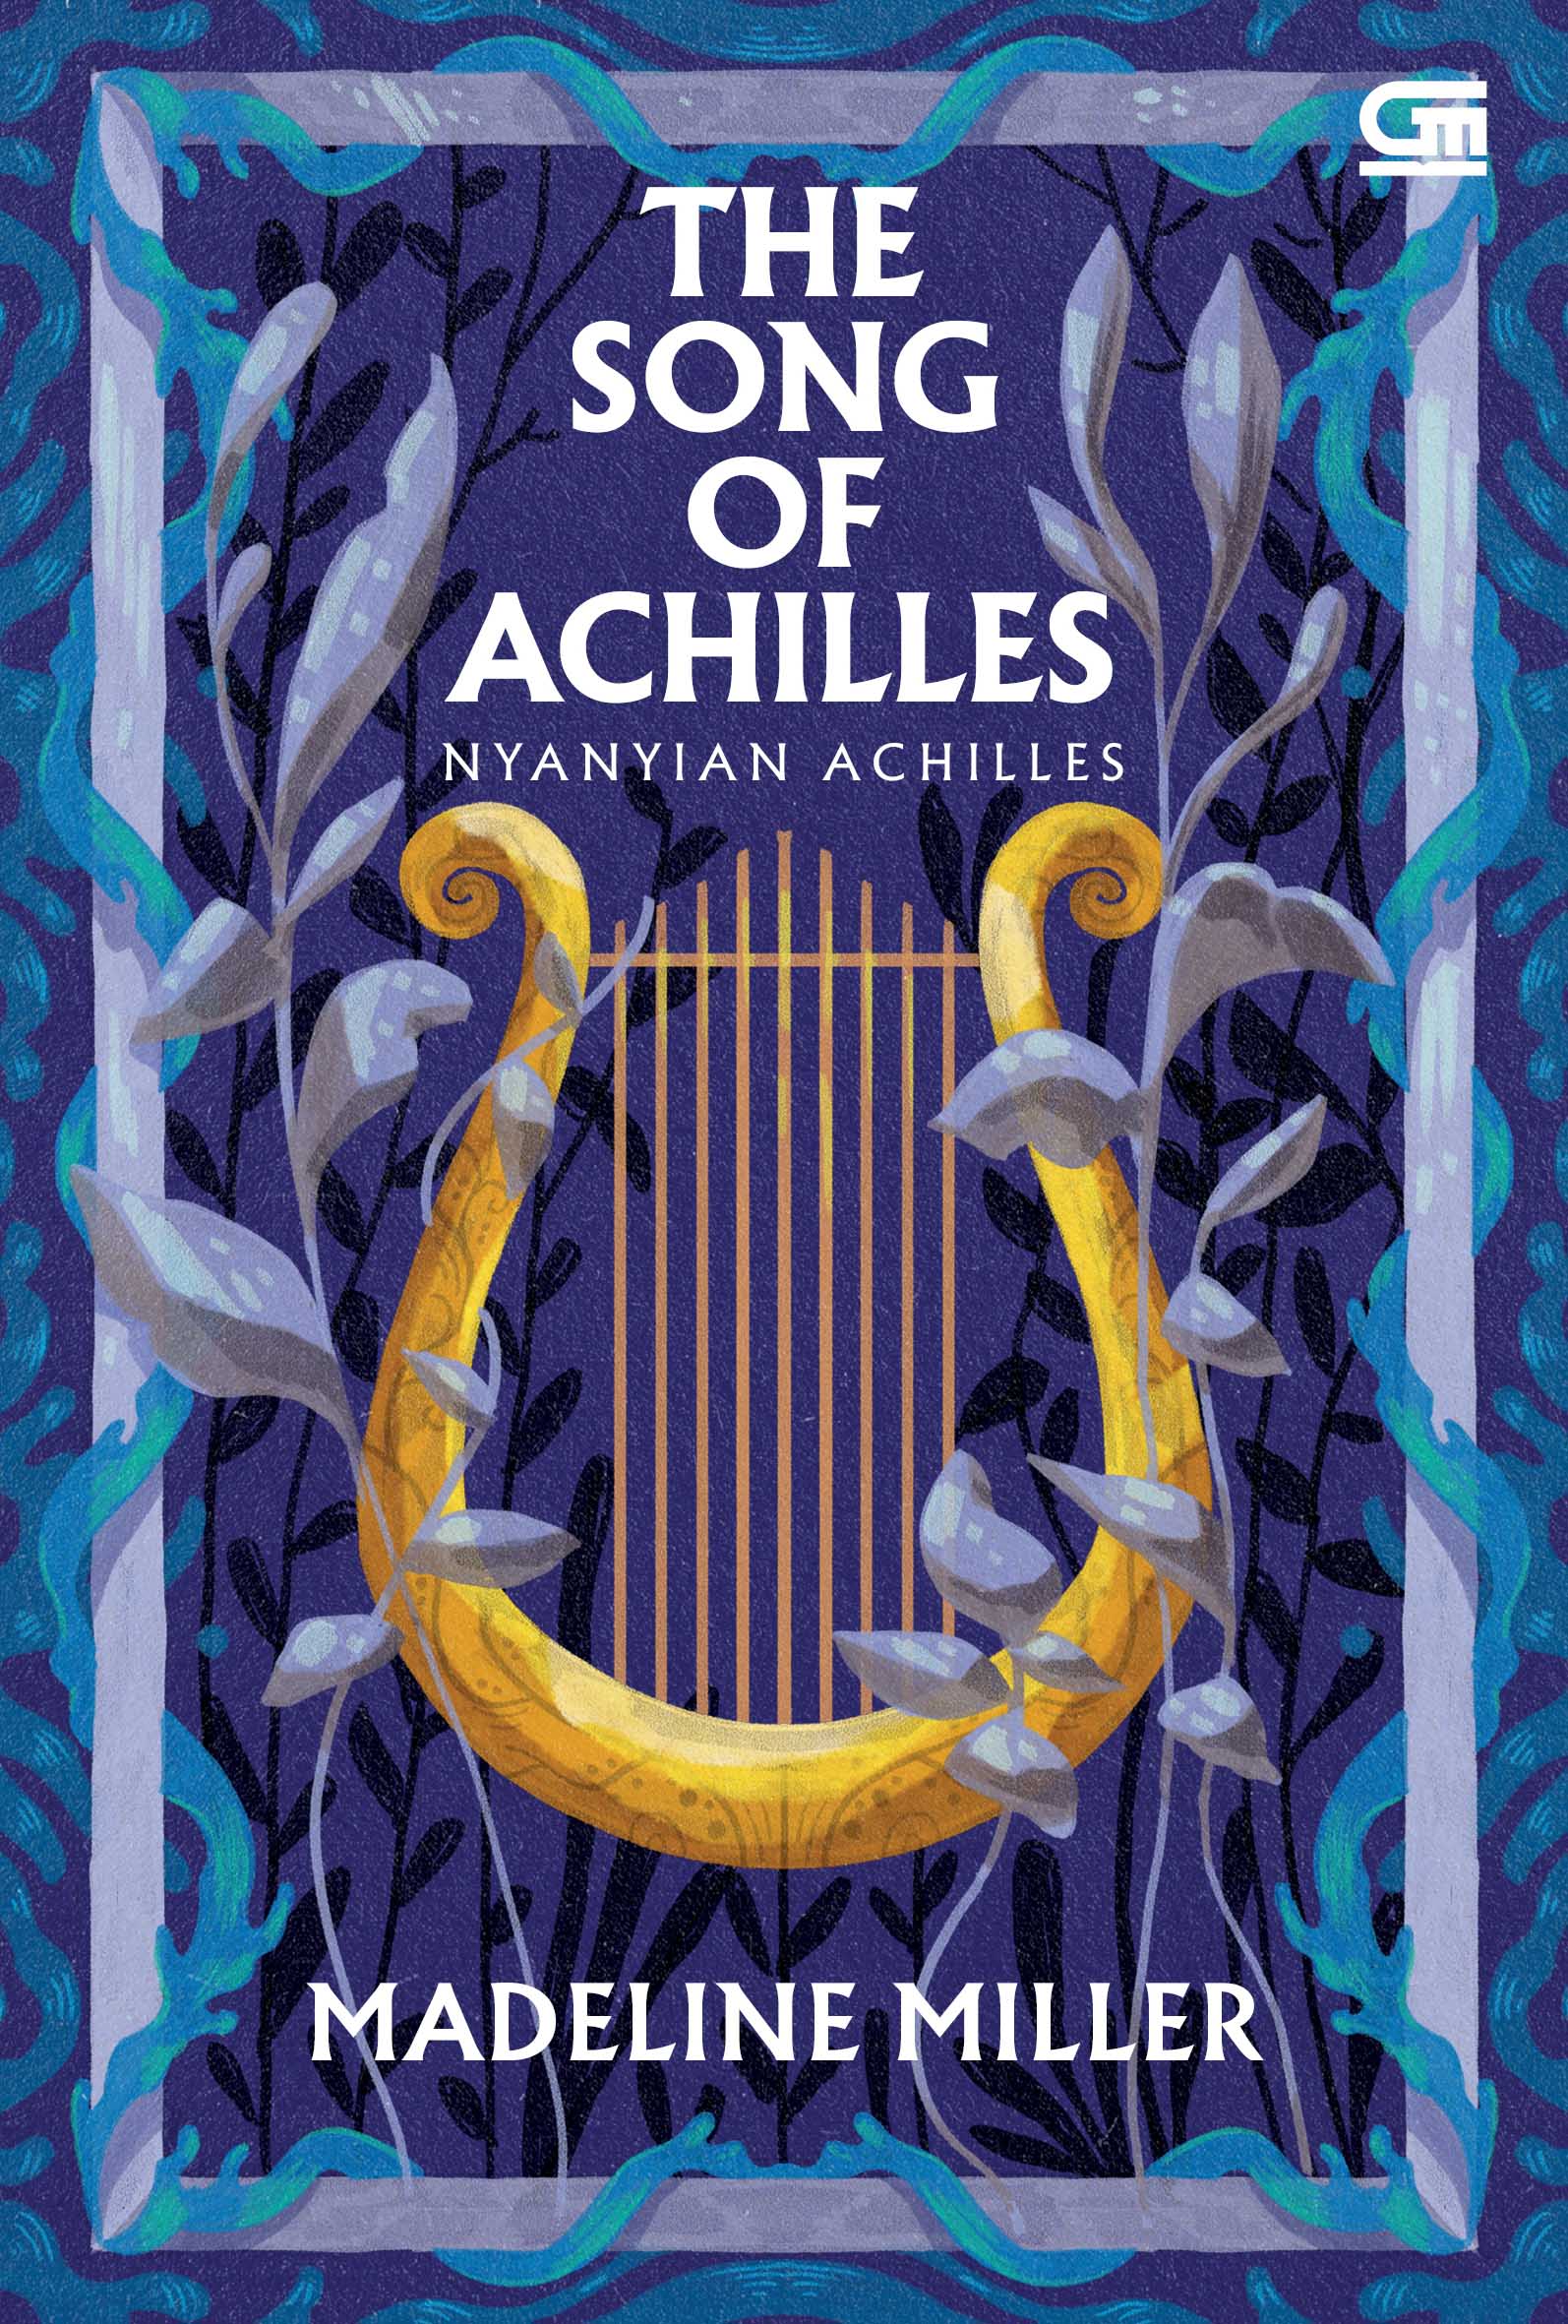 Nyanyian Achilles (The Song of Achilles)